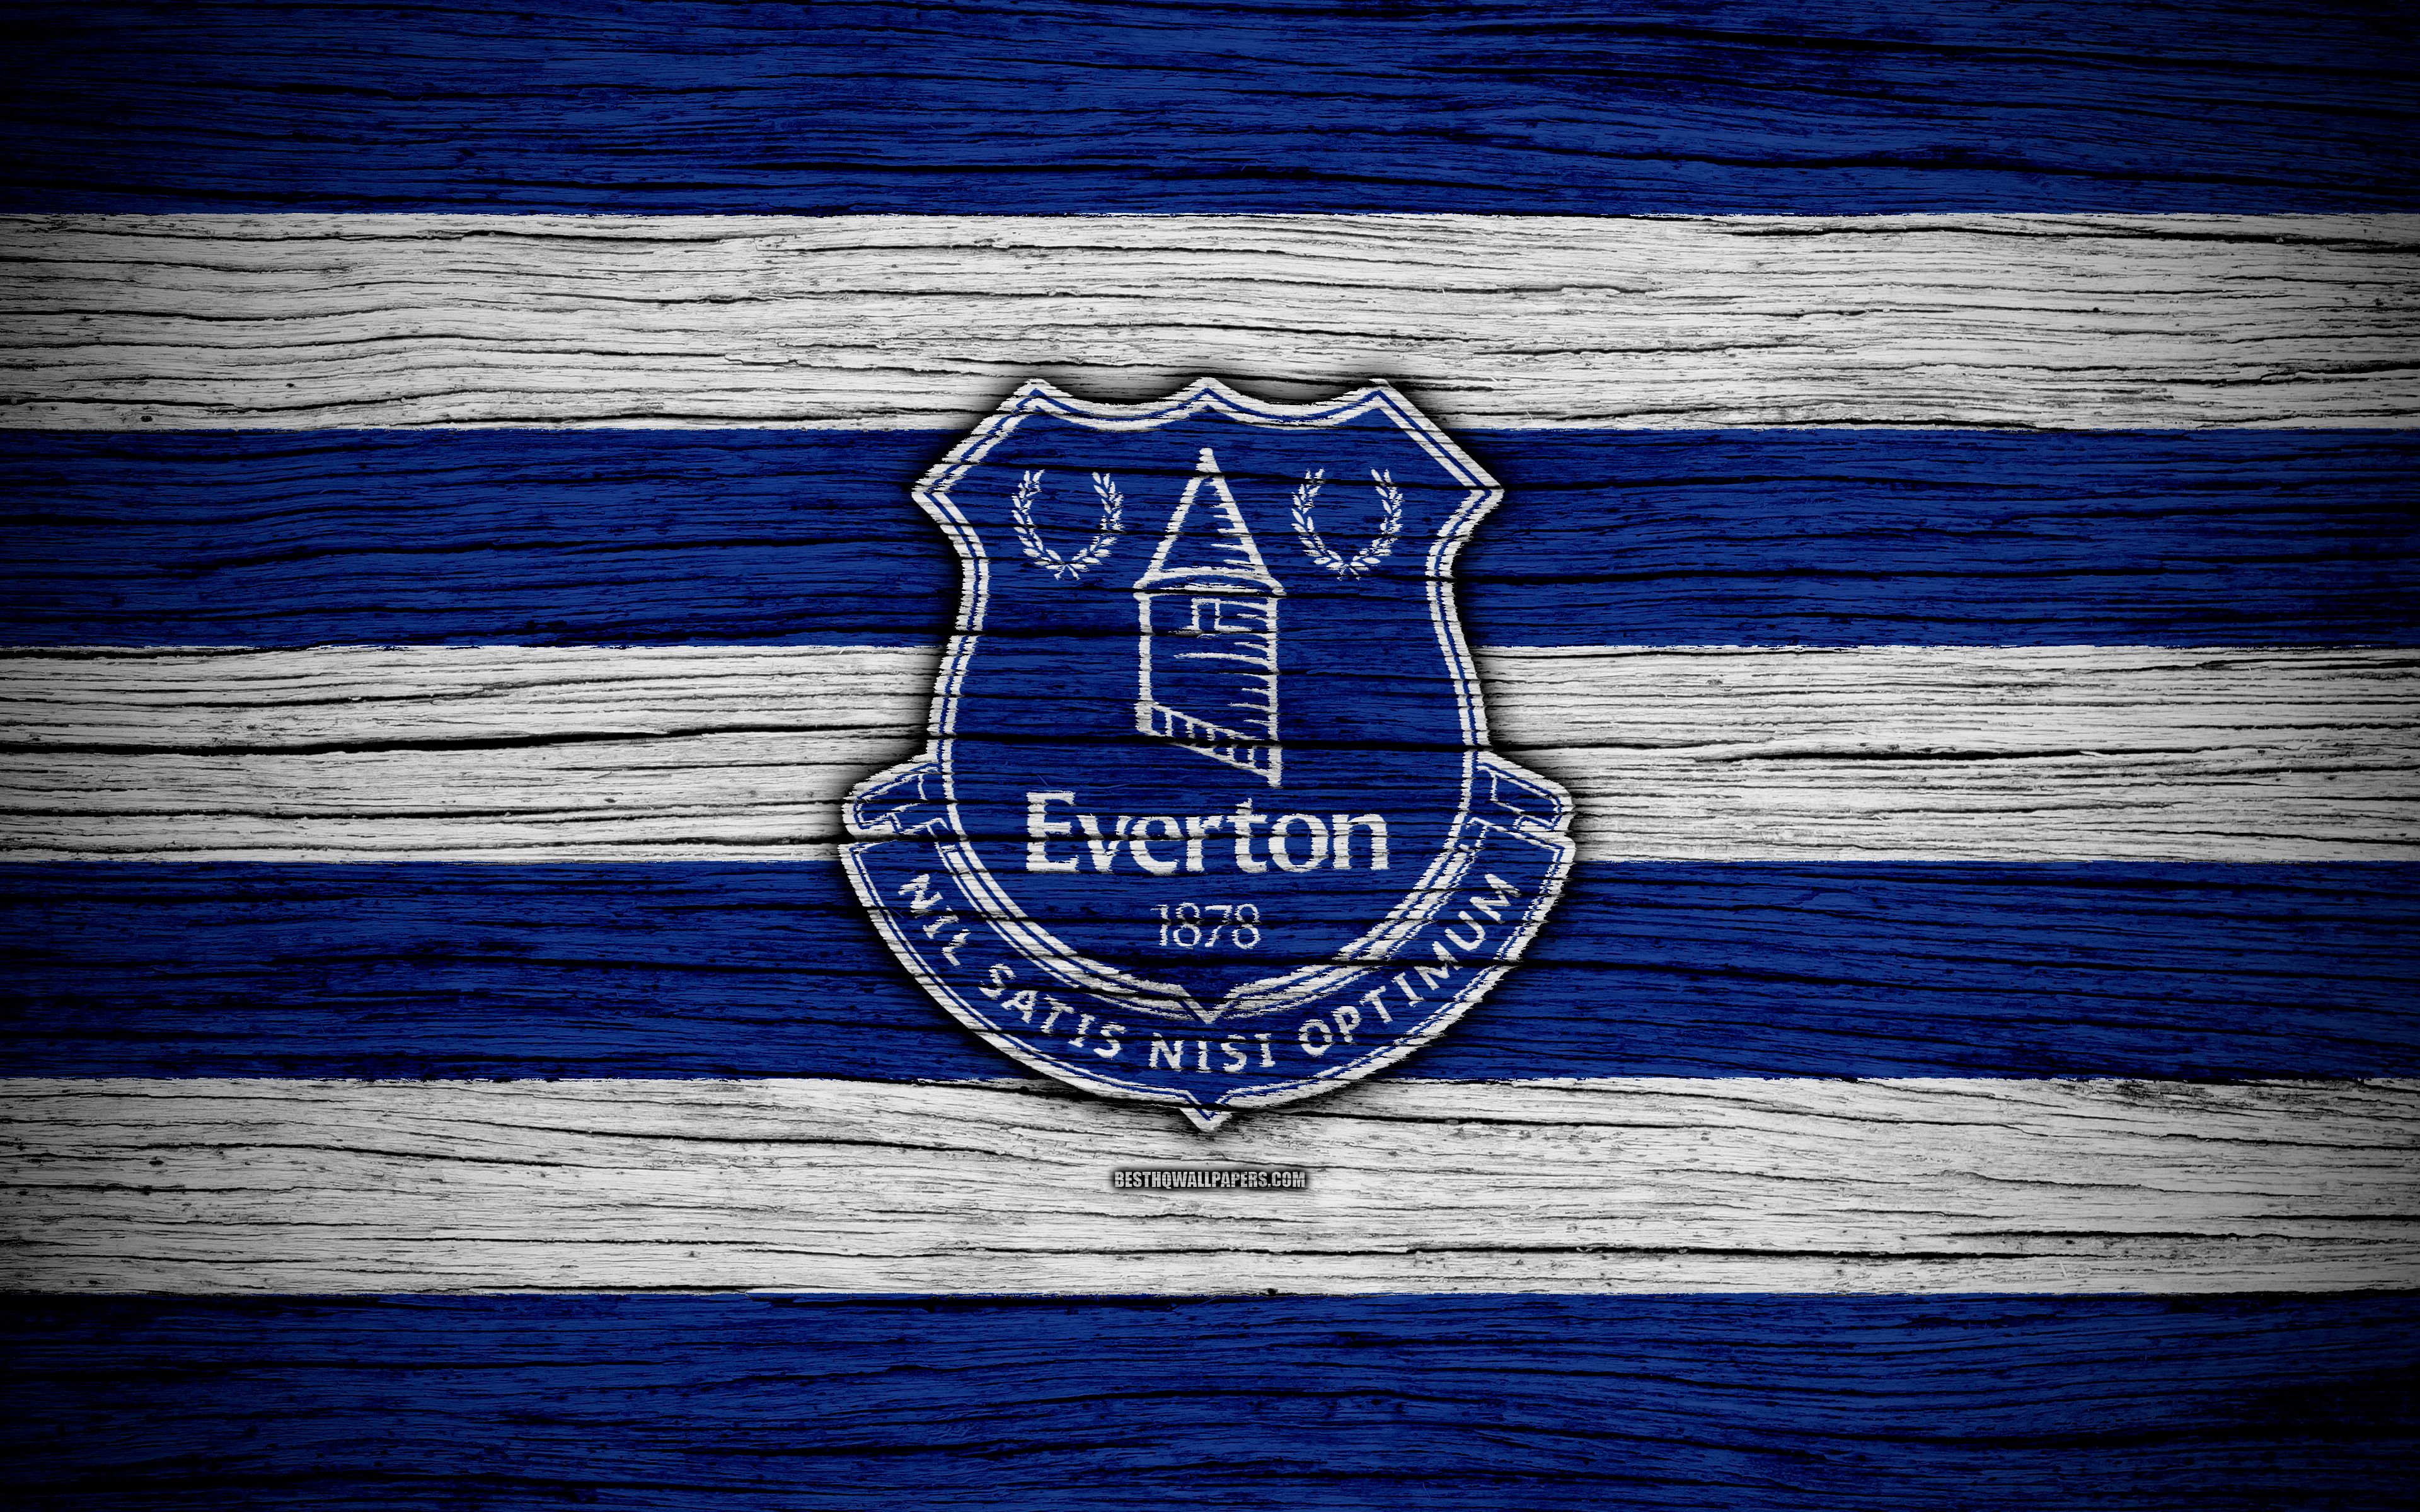 Download wallpaper Everton, 4k, Premier League, logo, England, wooden texture, FC Everton, soccer, football, Everton FC for desktop with resolution 3840x2400. High Quality HD picture wallpaper